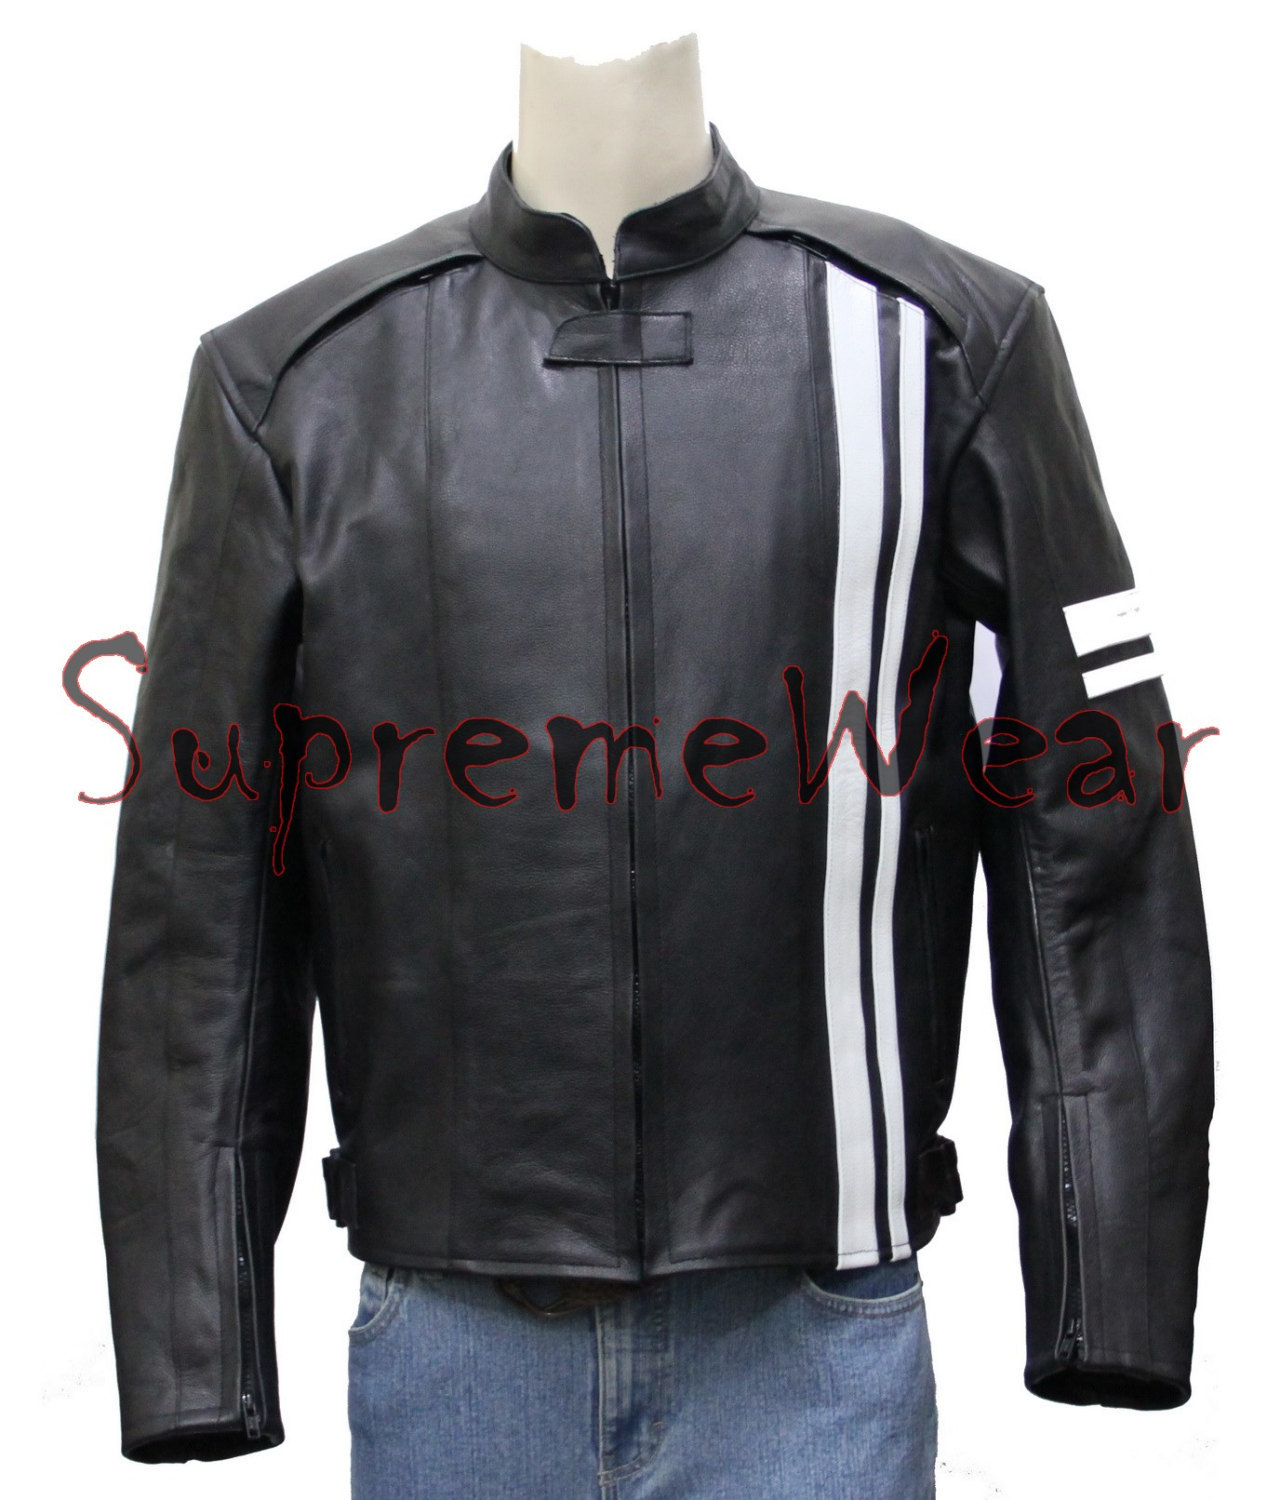 Custom made Handmade Motorcycle Leather Jacket with Pads, Leather Jacket for men - $149.00